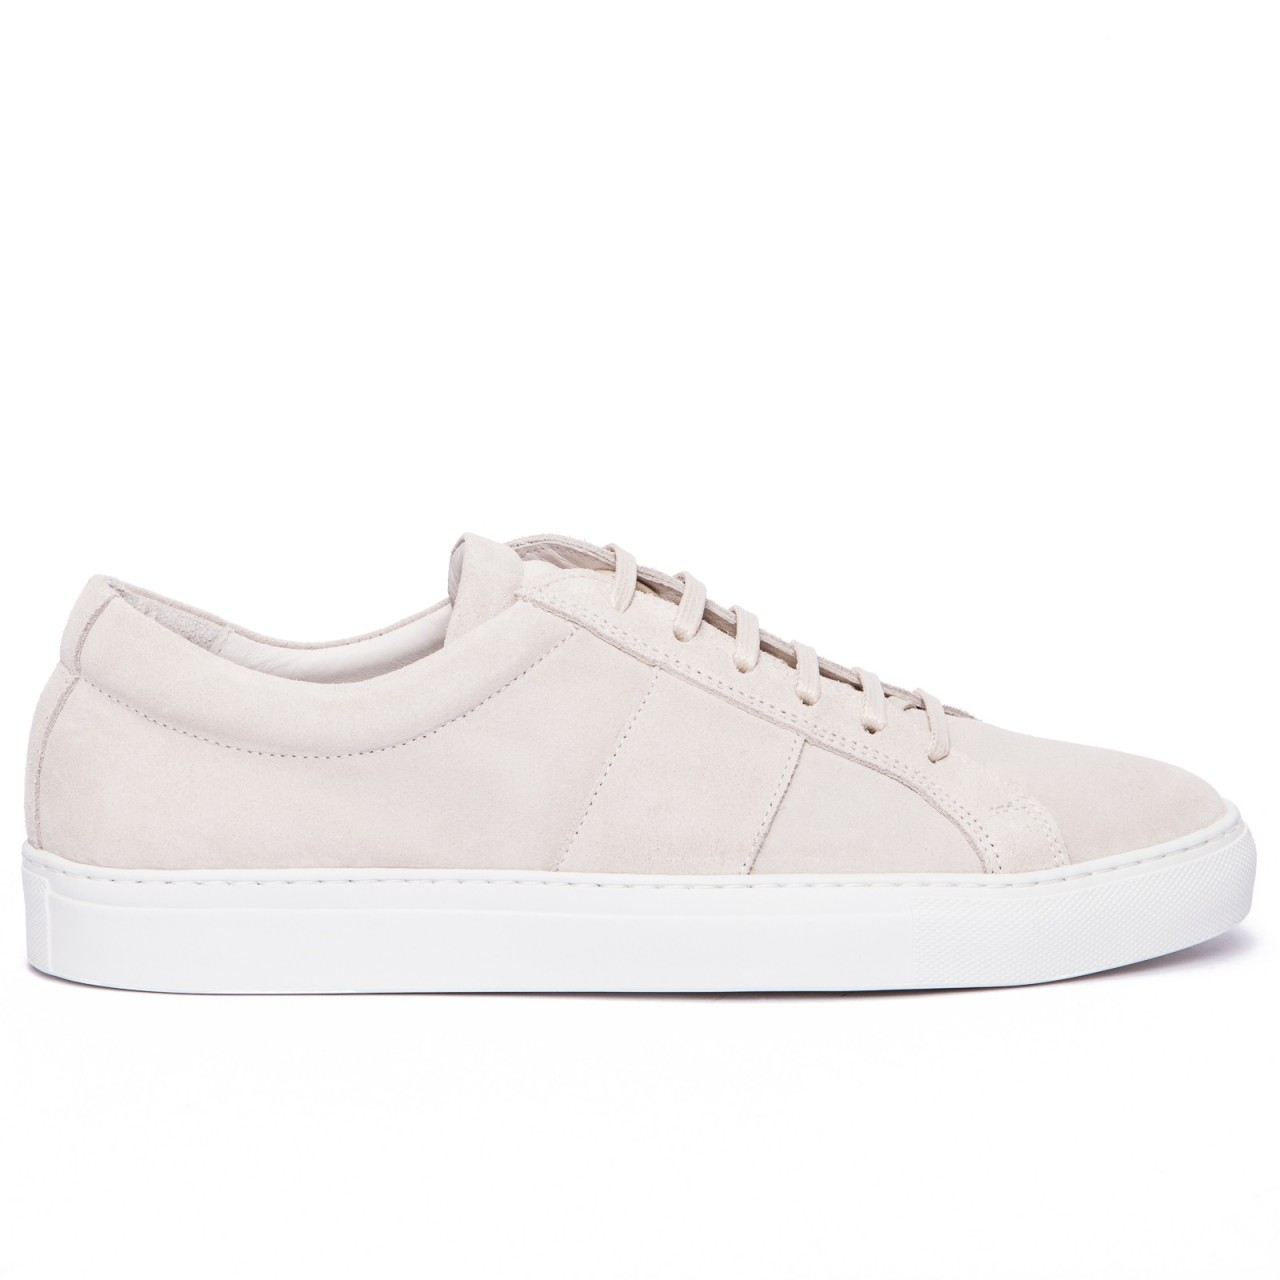 It’s On Sale: National Standard suede sneakers